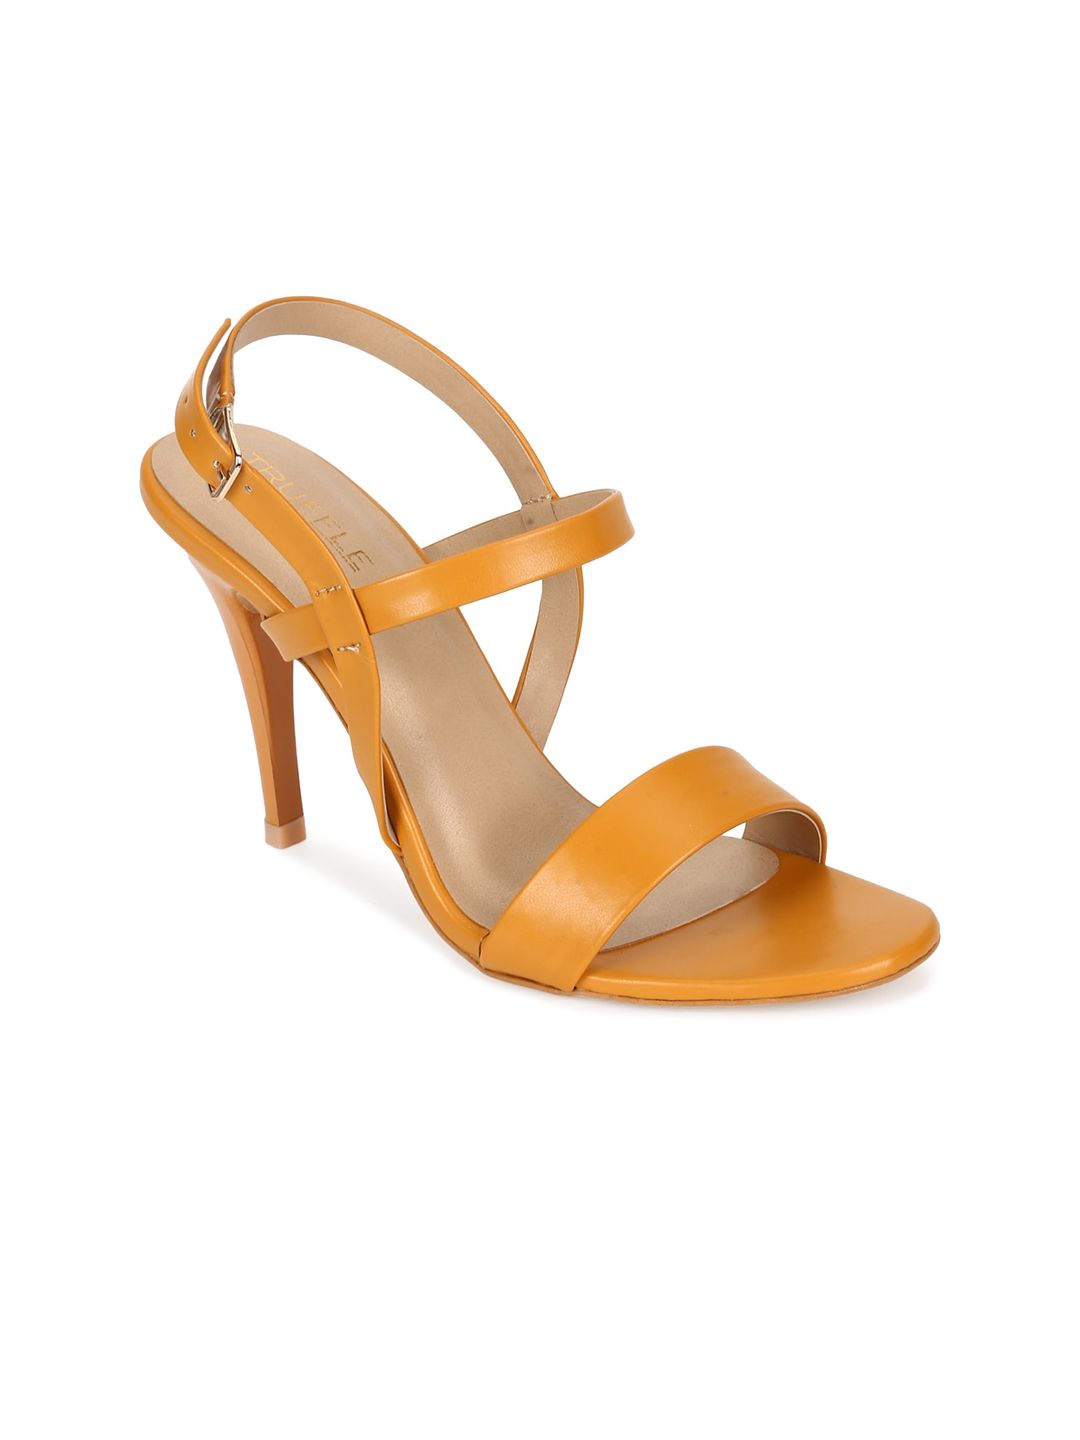 Truffle Collection Mustard PU Stiletto Sandals with Buckles Price in India